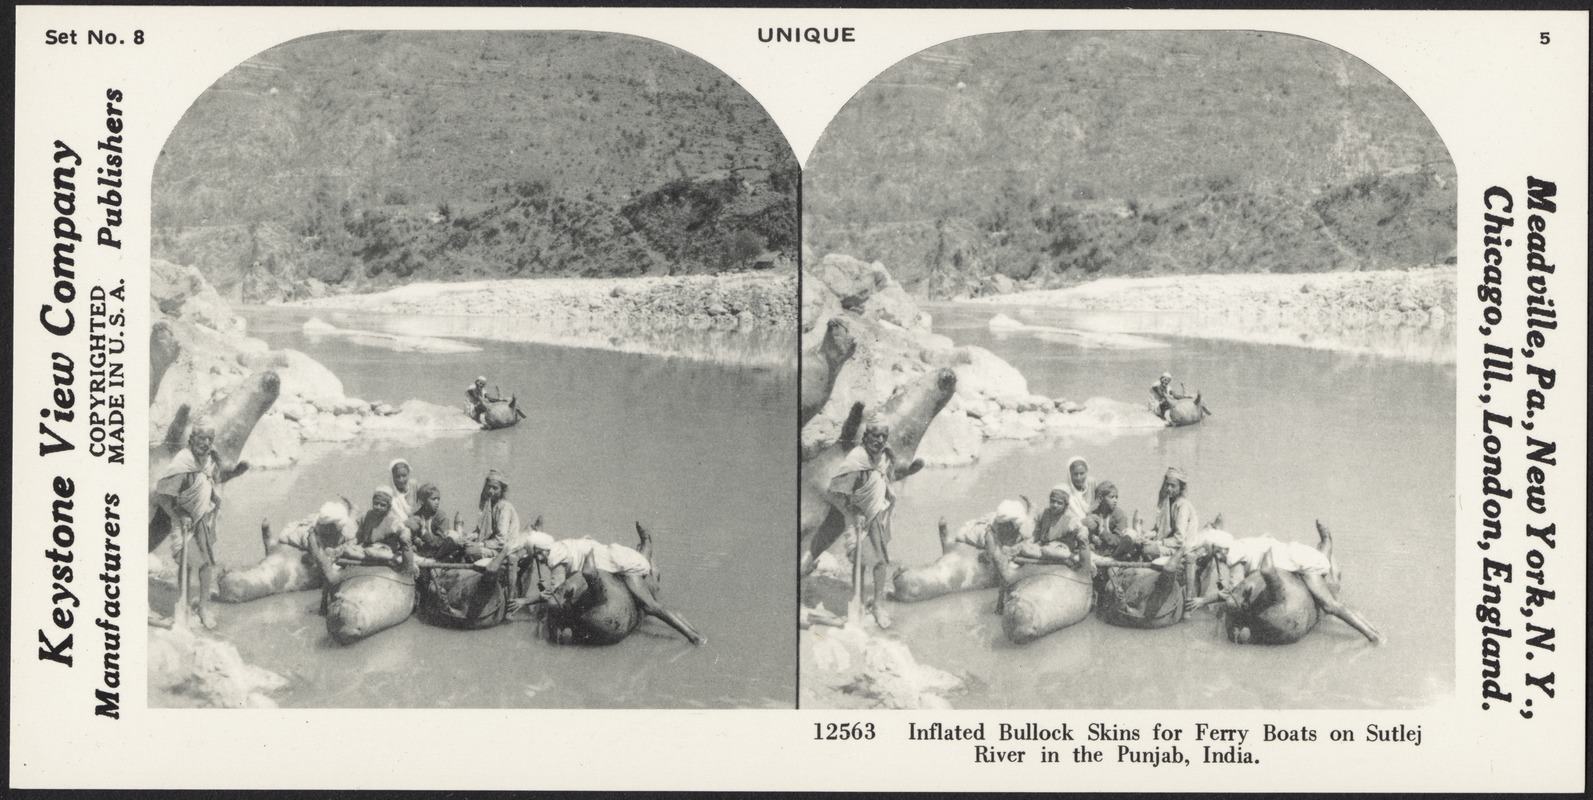 Inflated bullock skins for ferry boats on Sutlej River in the Punjab, India